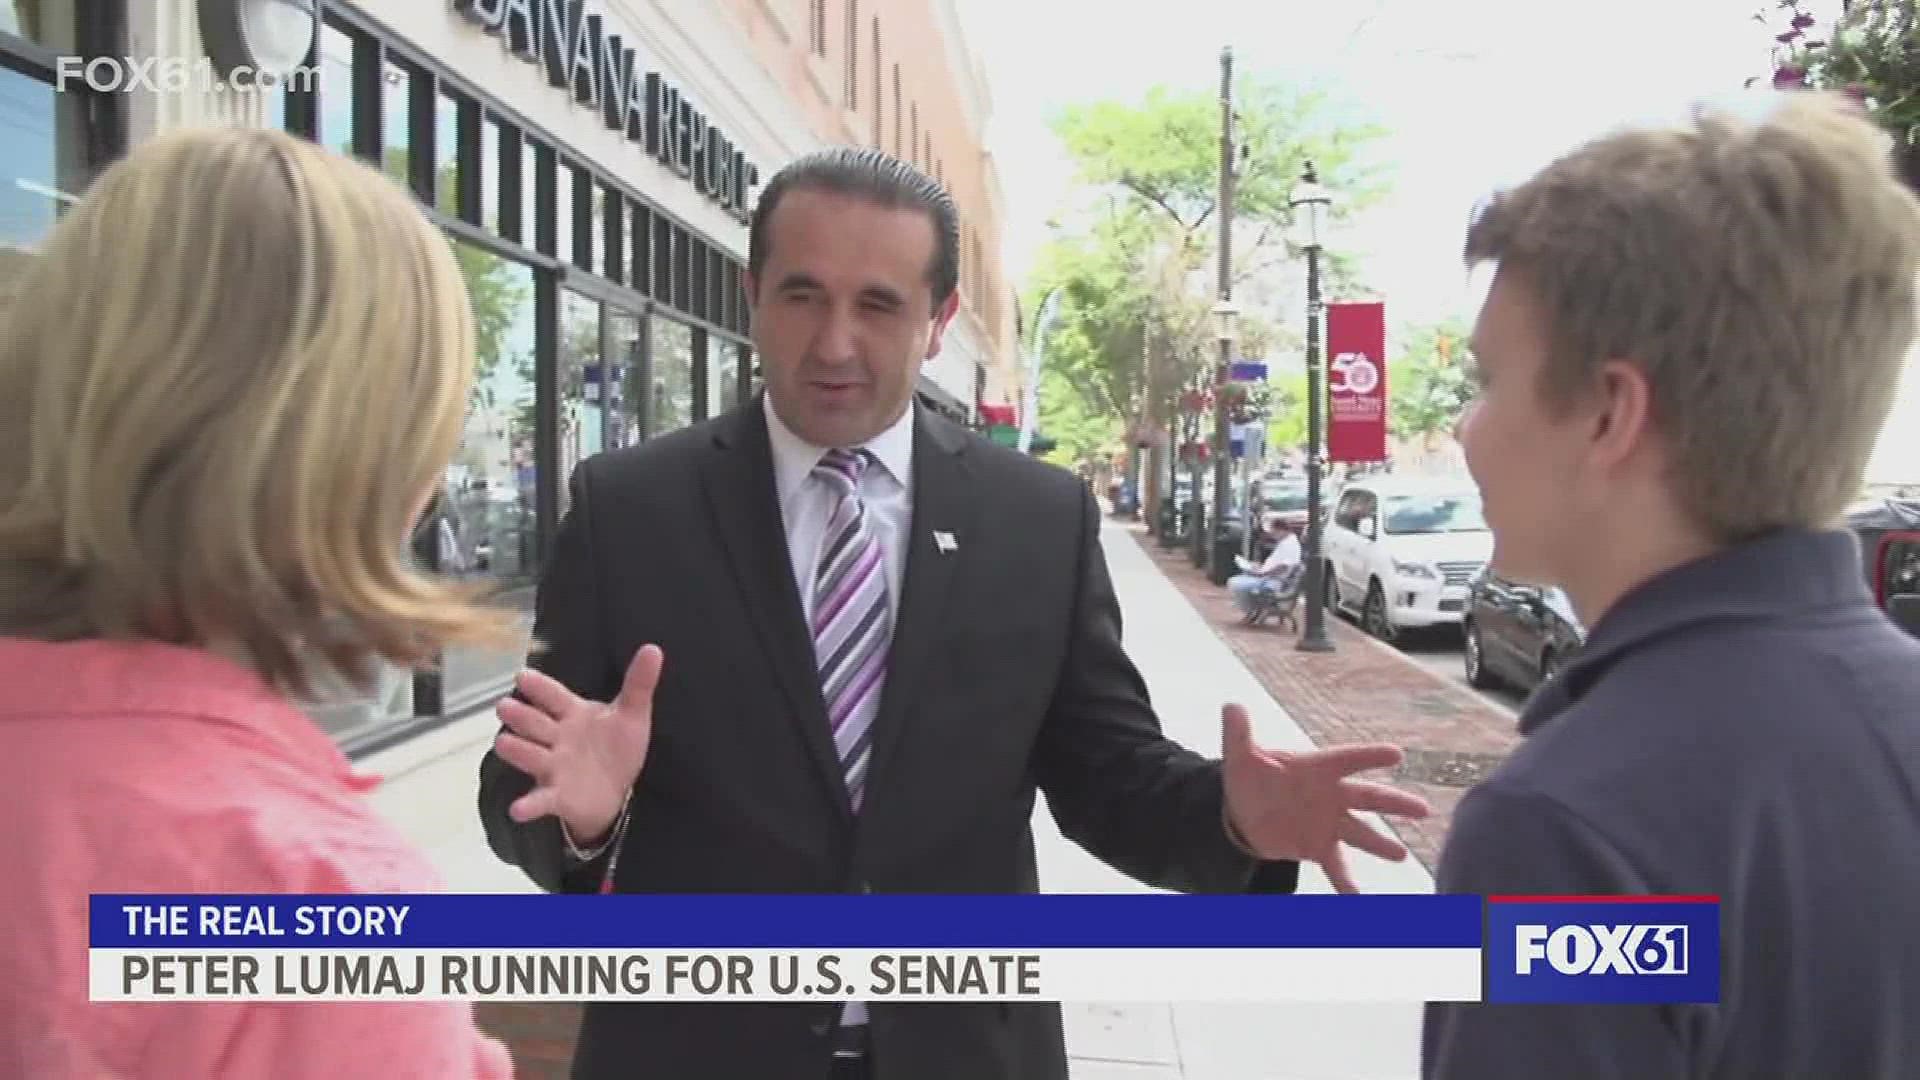 Peter Lumaj is running on the GOP ticket for the U.S. Senate for a second time. He’s also run for governor and Secretary of the State in the past